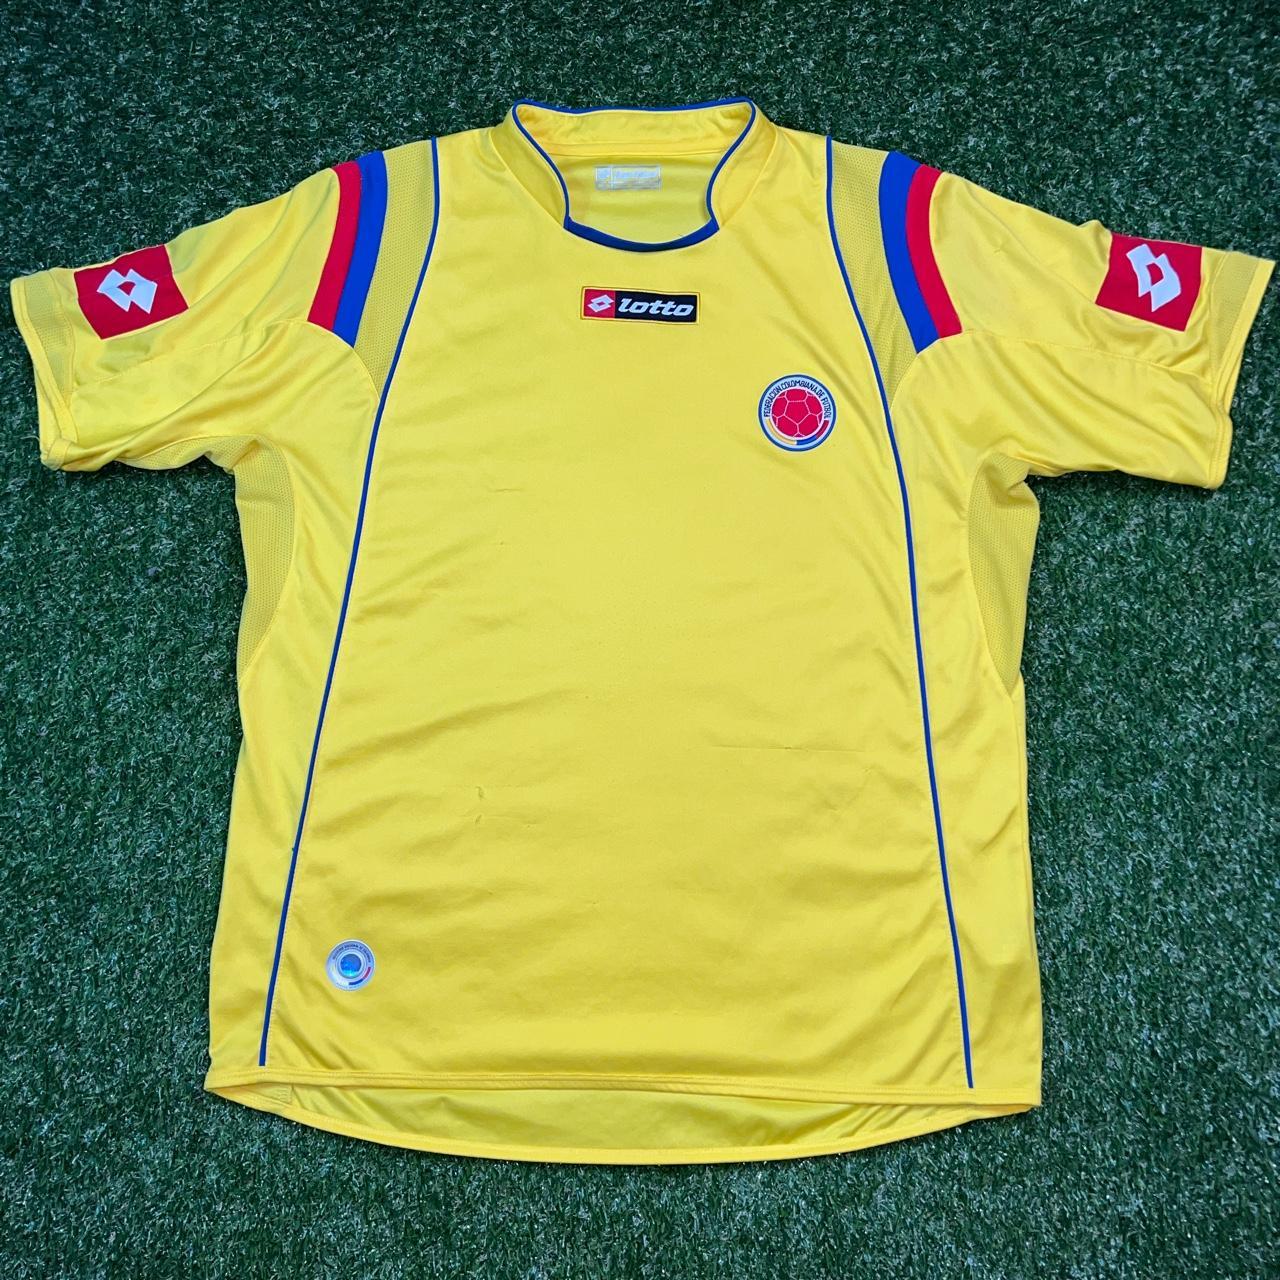 Lotto Men's Yellow and Blue Shirt